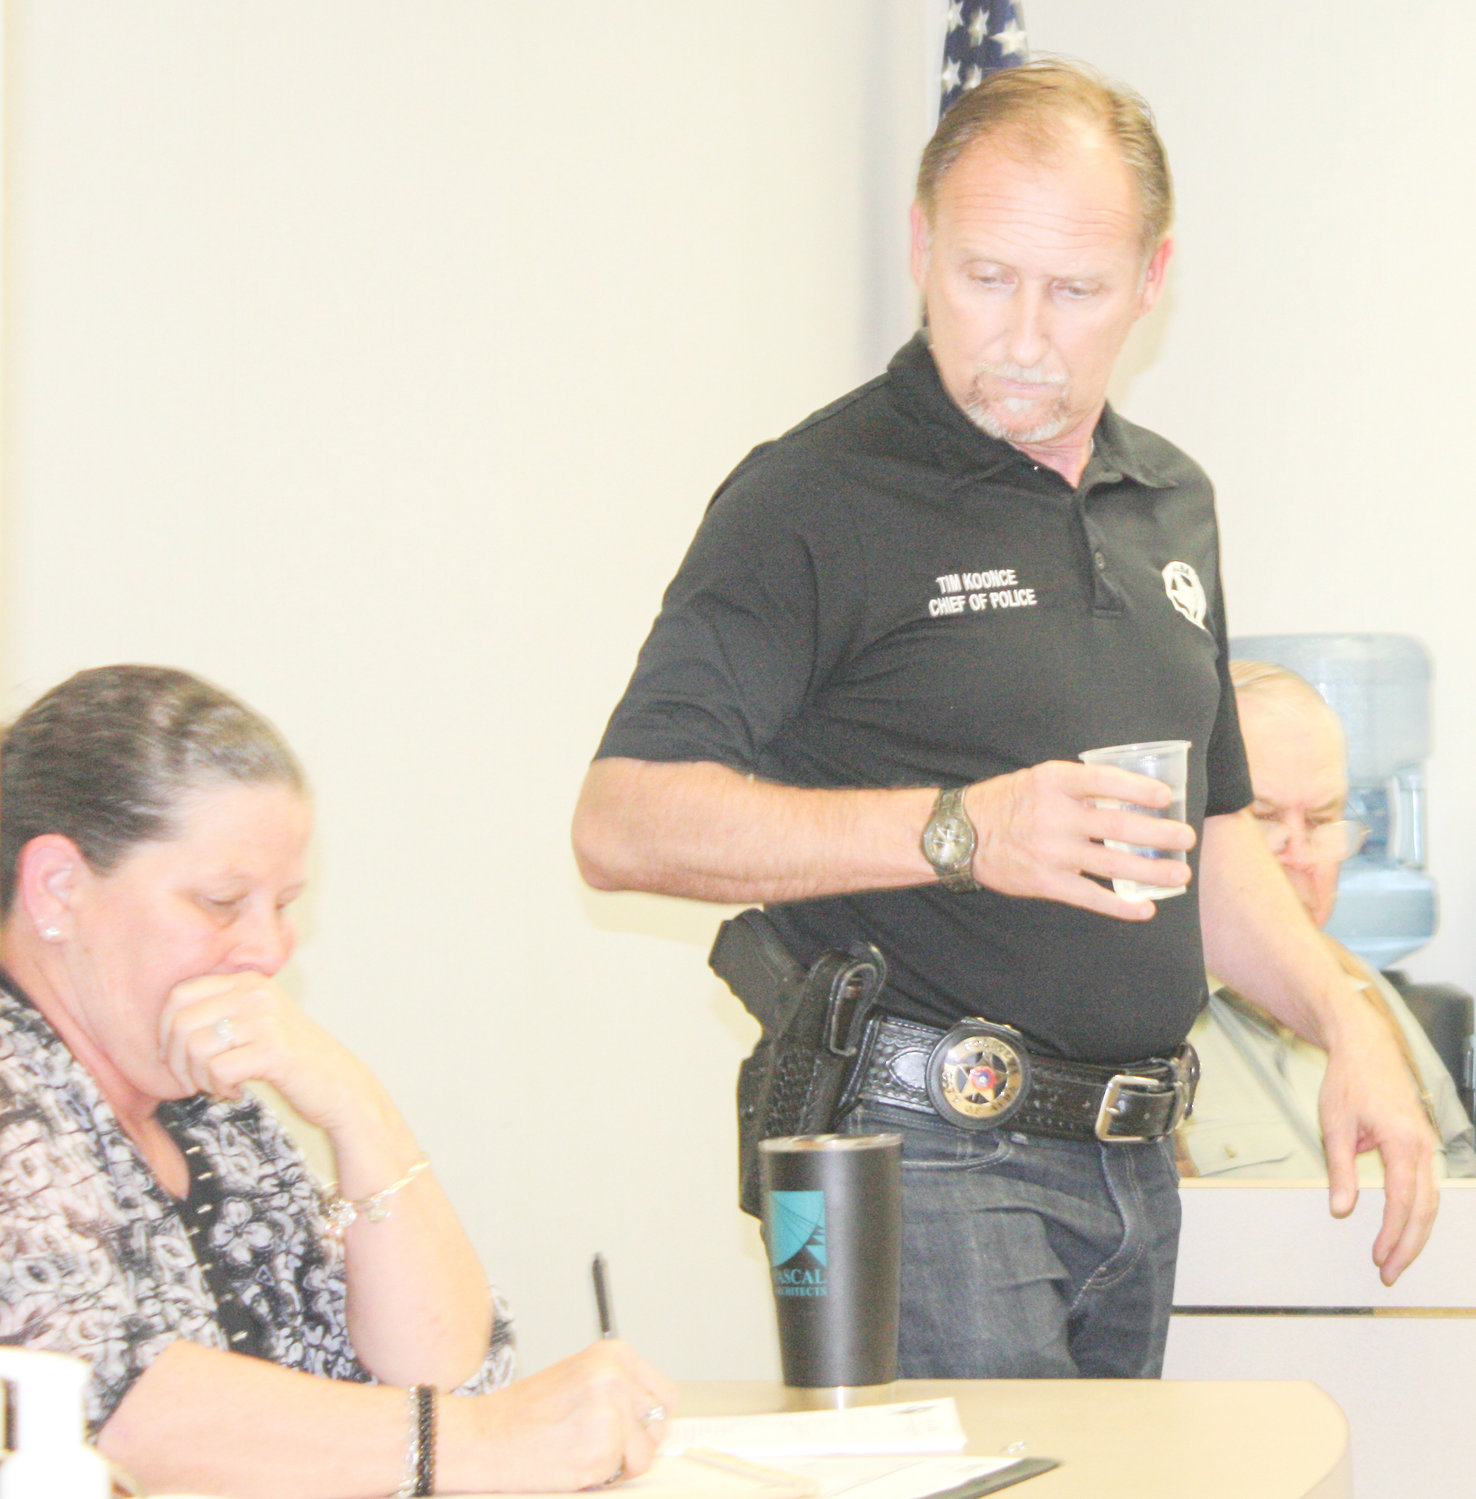 Alba Police Chief Tim Koonce looks on as Alba City Secretary Lindy McCarty goes over some paperwork just before the start of the Alba City Council monthly meeting last Monday night. Both Koonce and McCarty were listed on the agenda as topics of an executive session of the council.